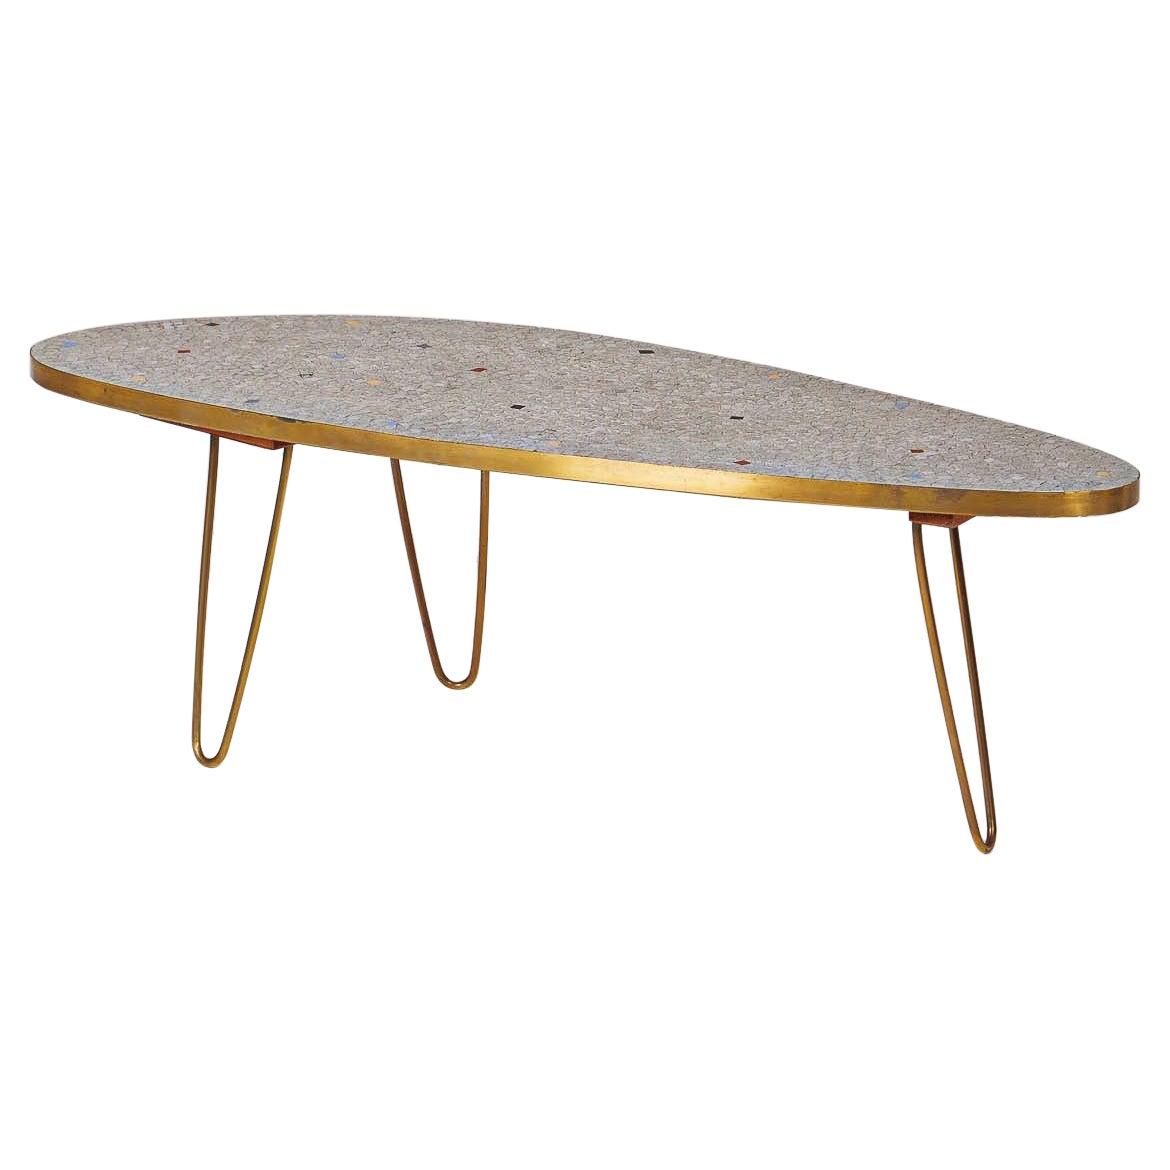 Ceramic and brass coffee table